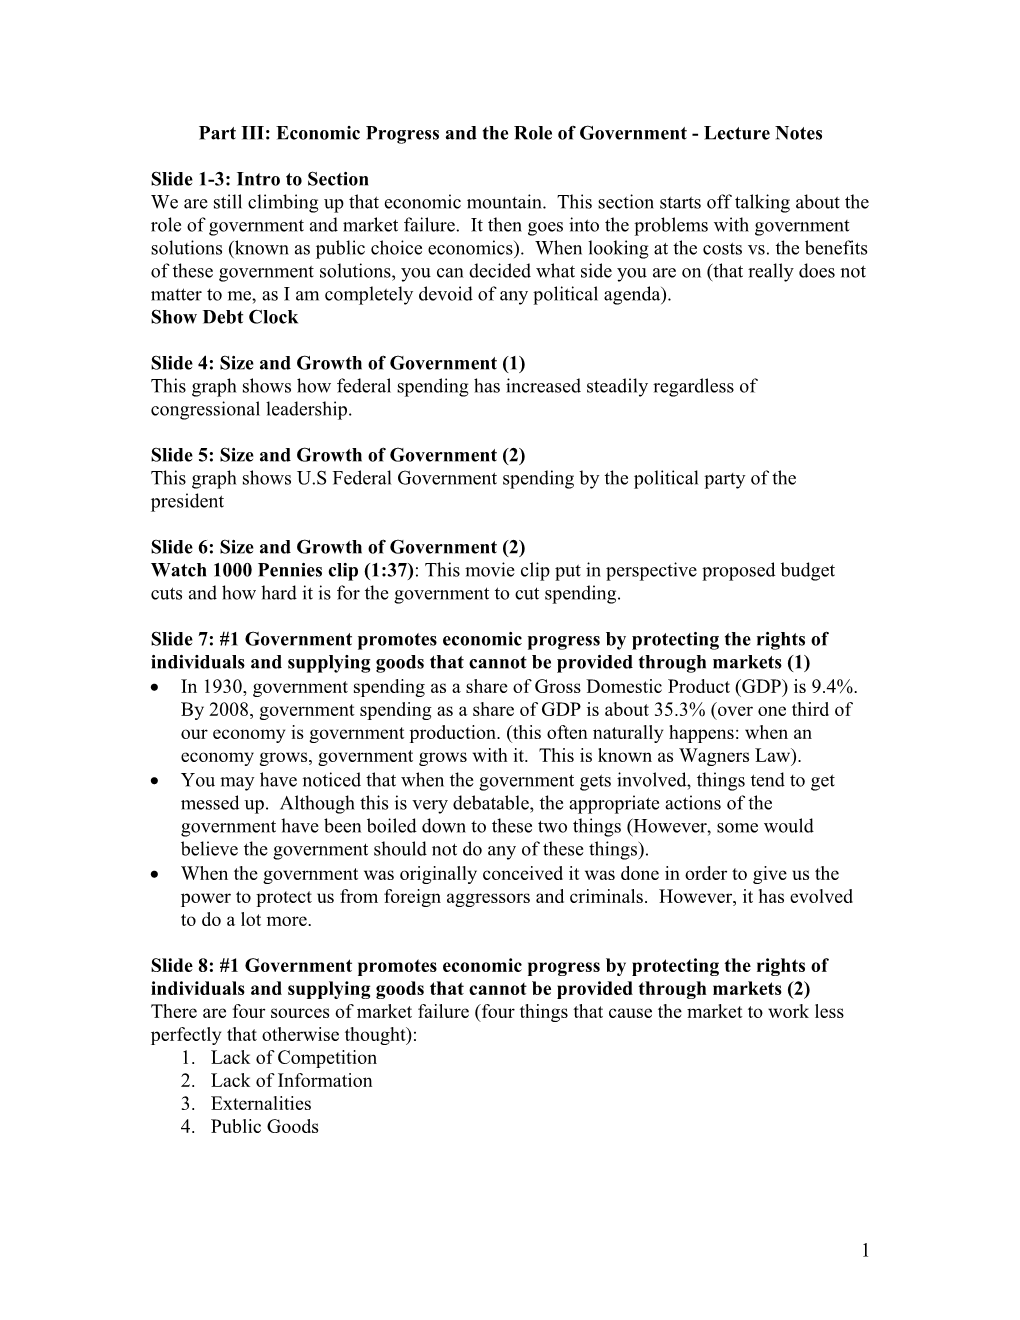 Part III: Economic Progress And The Role Of Government - Lecture Notes